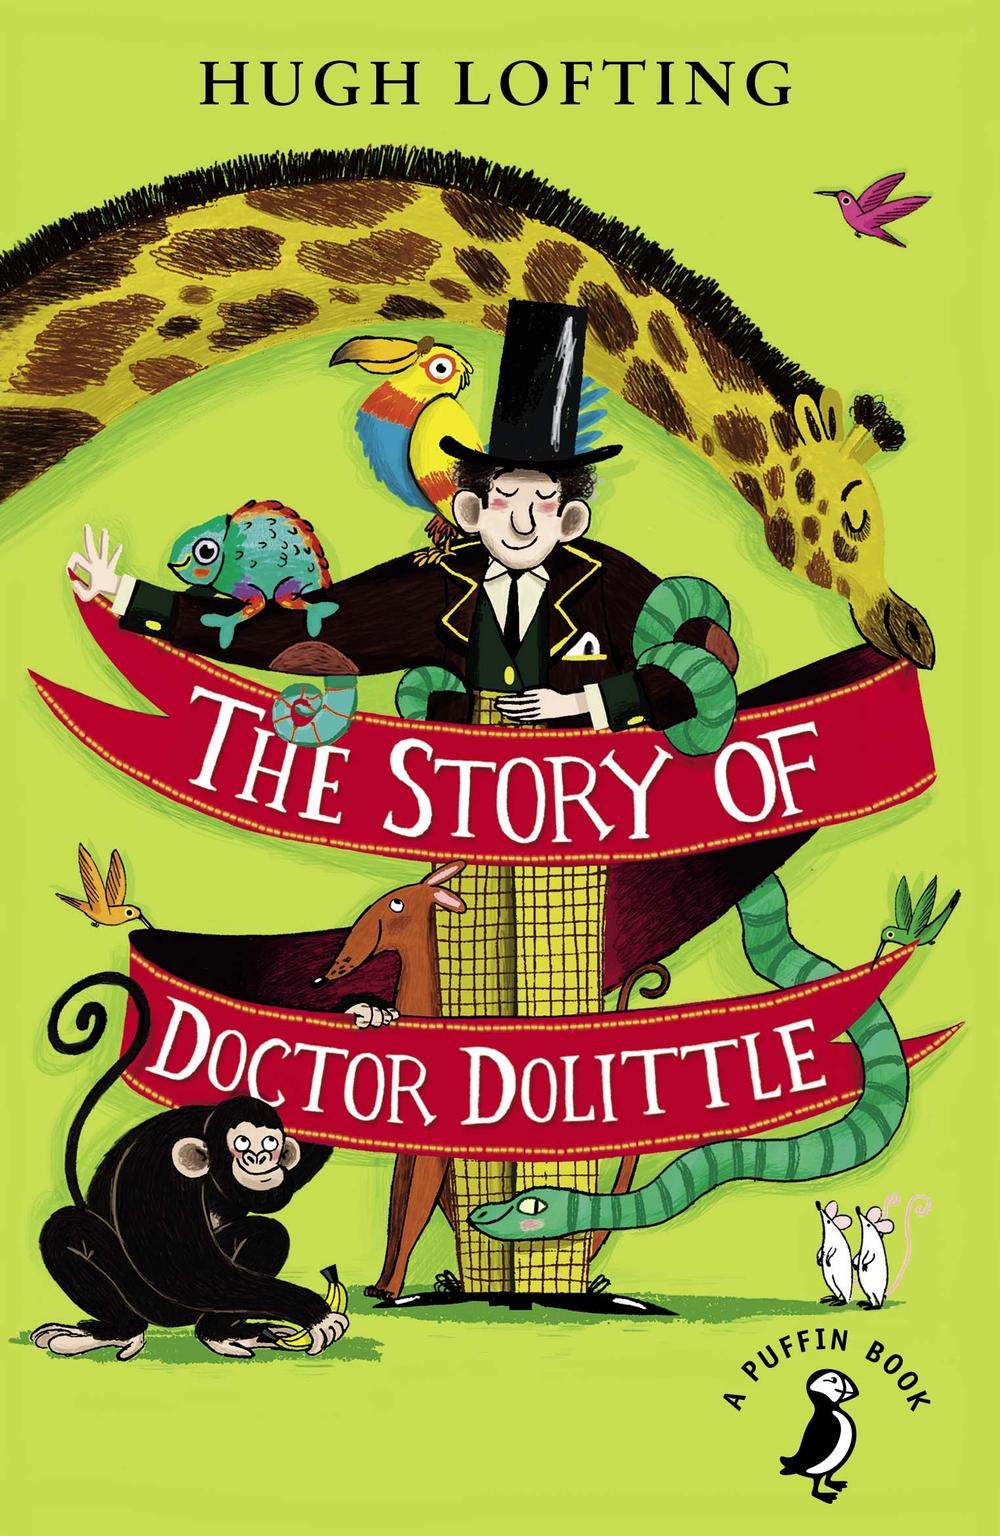 of　Doctor　Story　online　Lofting,　by　Buy　9780241363133　Hugh　Paperback,　at　The　Nile　Dolittle　The